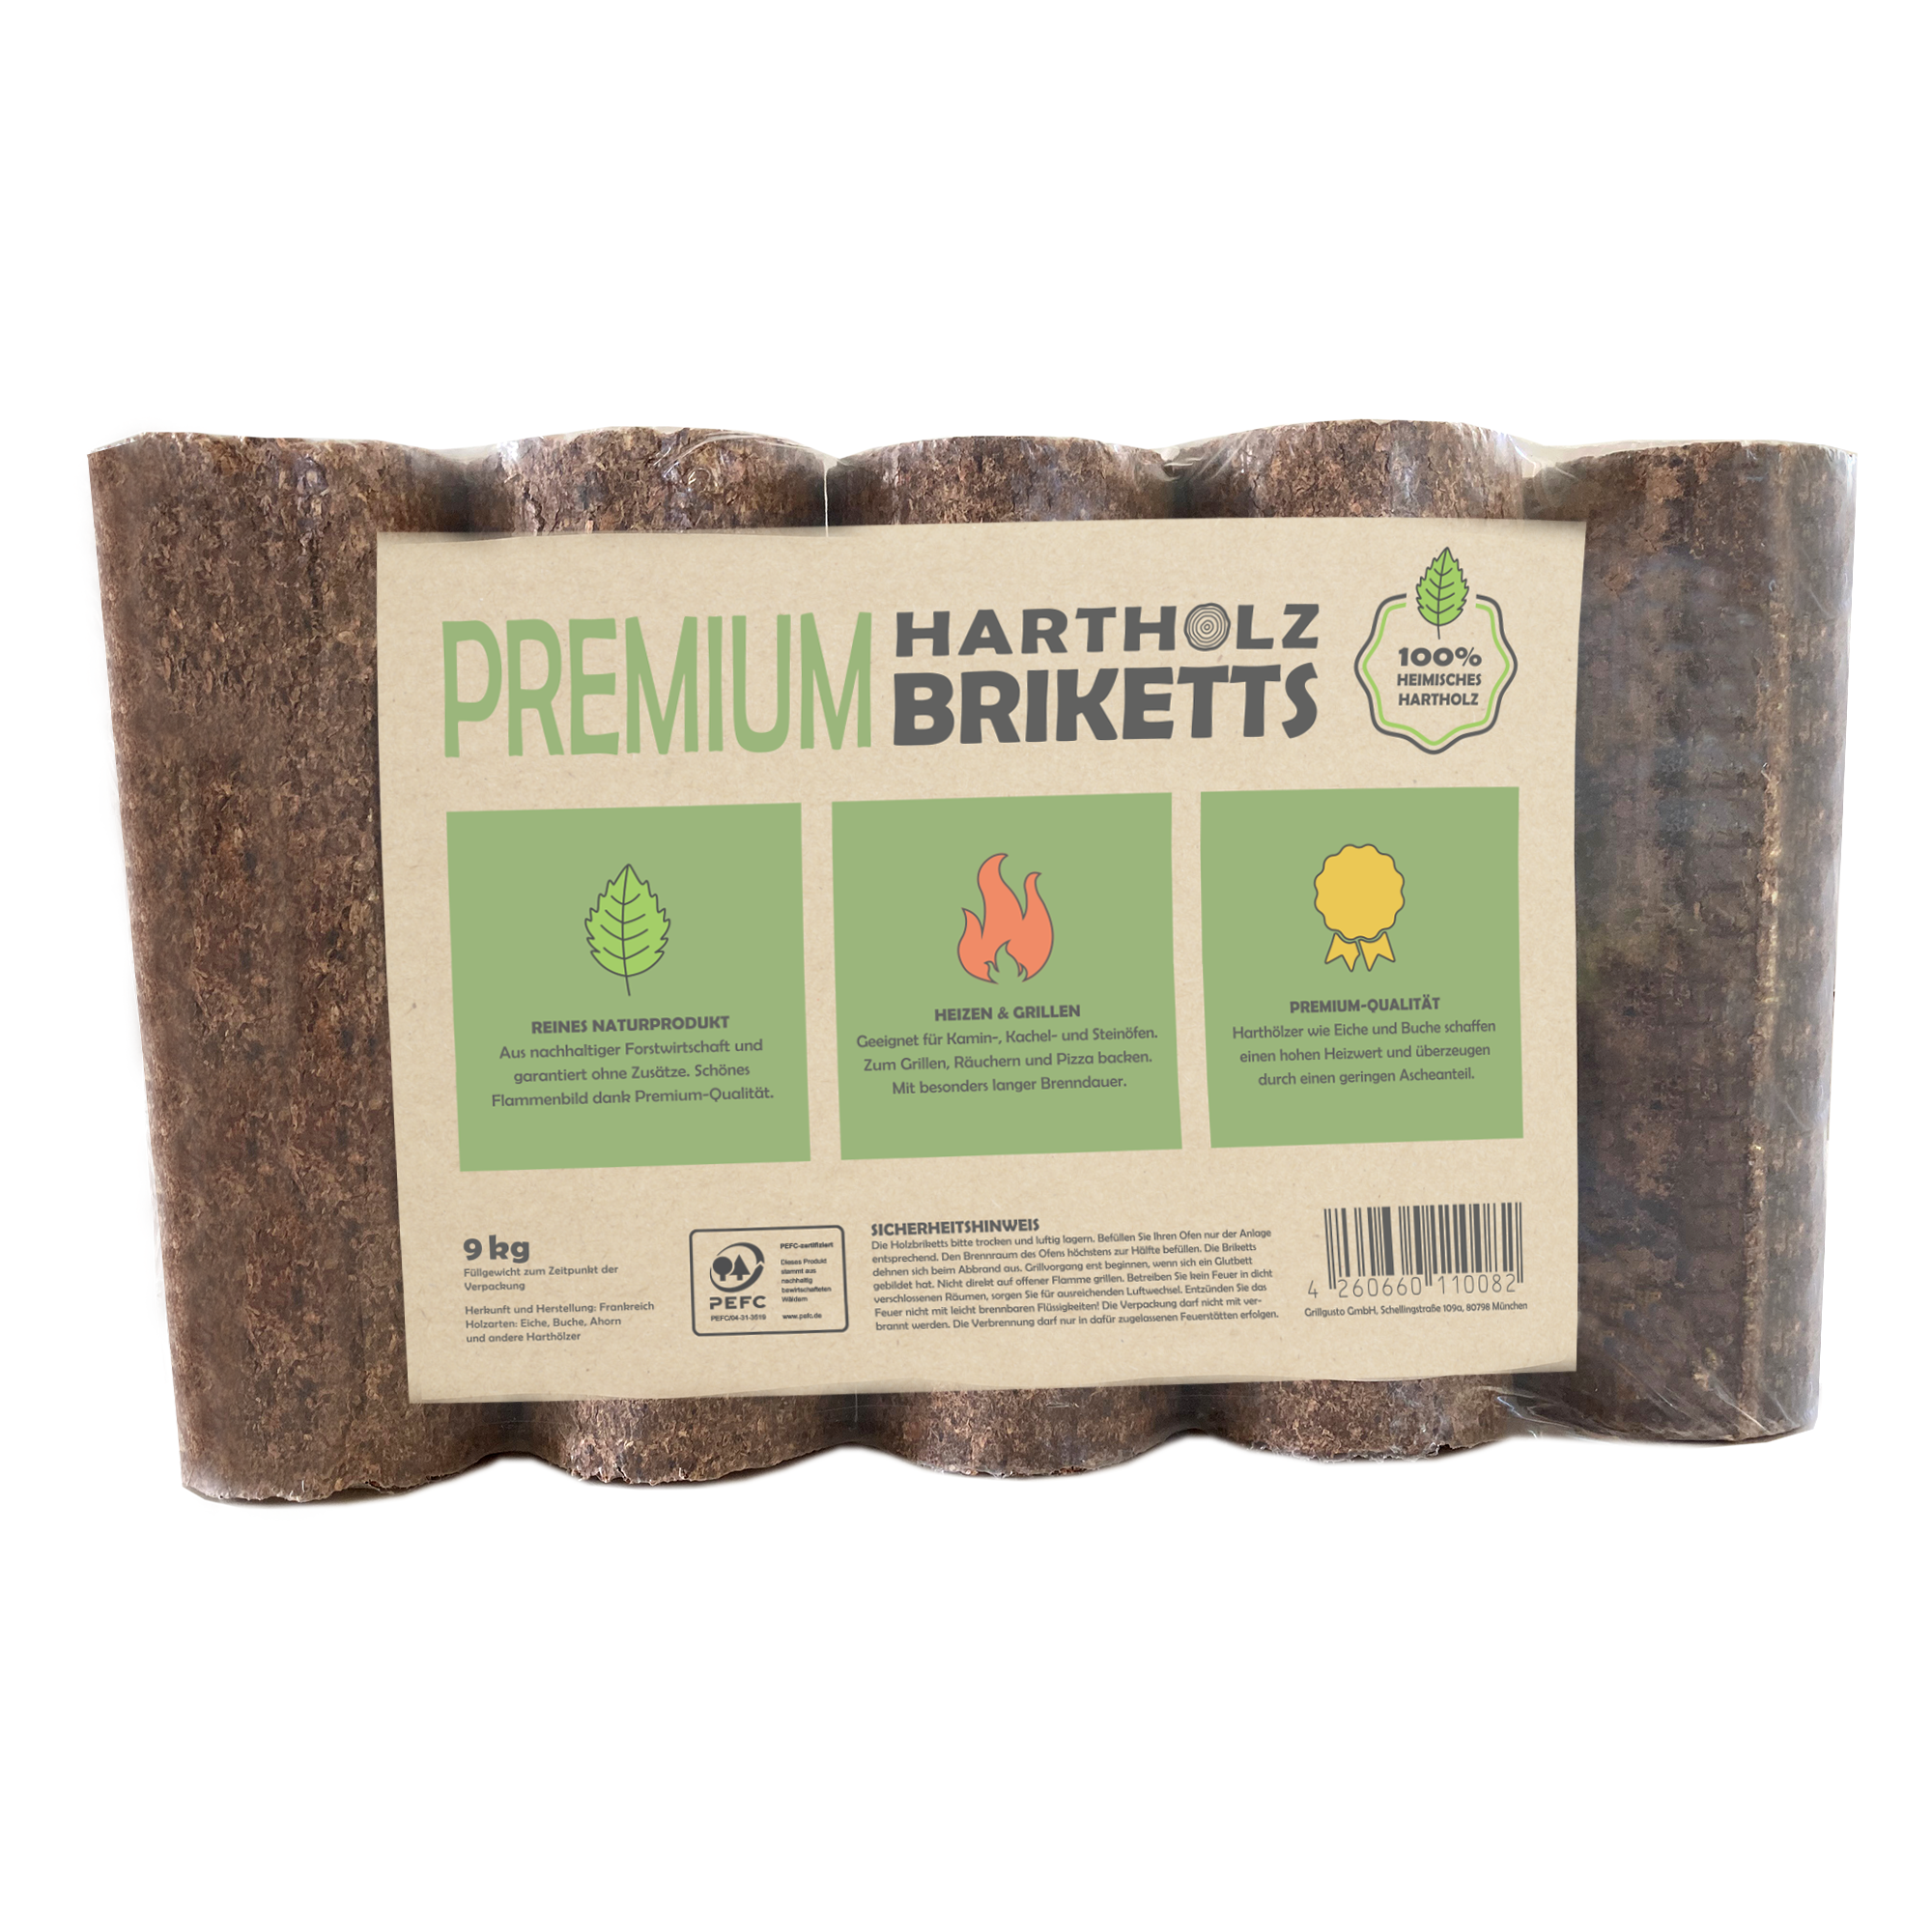 Premium-Hartholzbriketts 9 kg + product picture